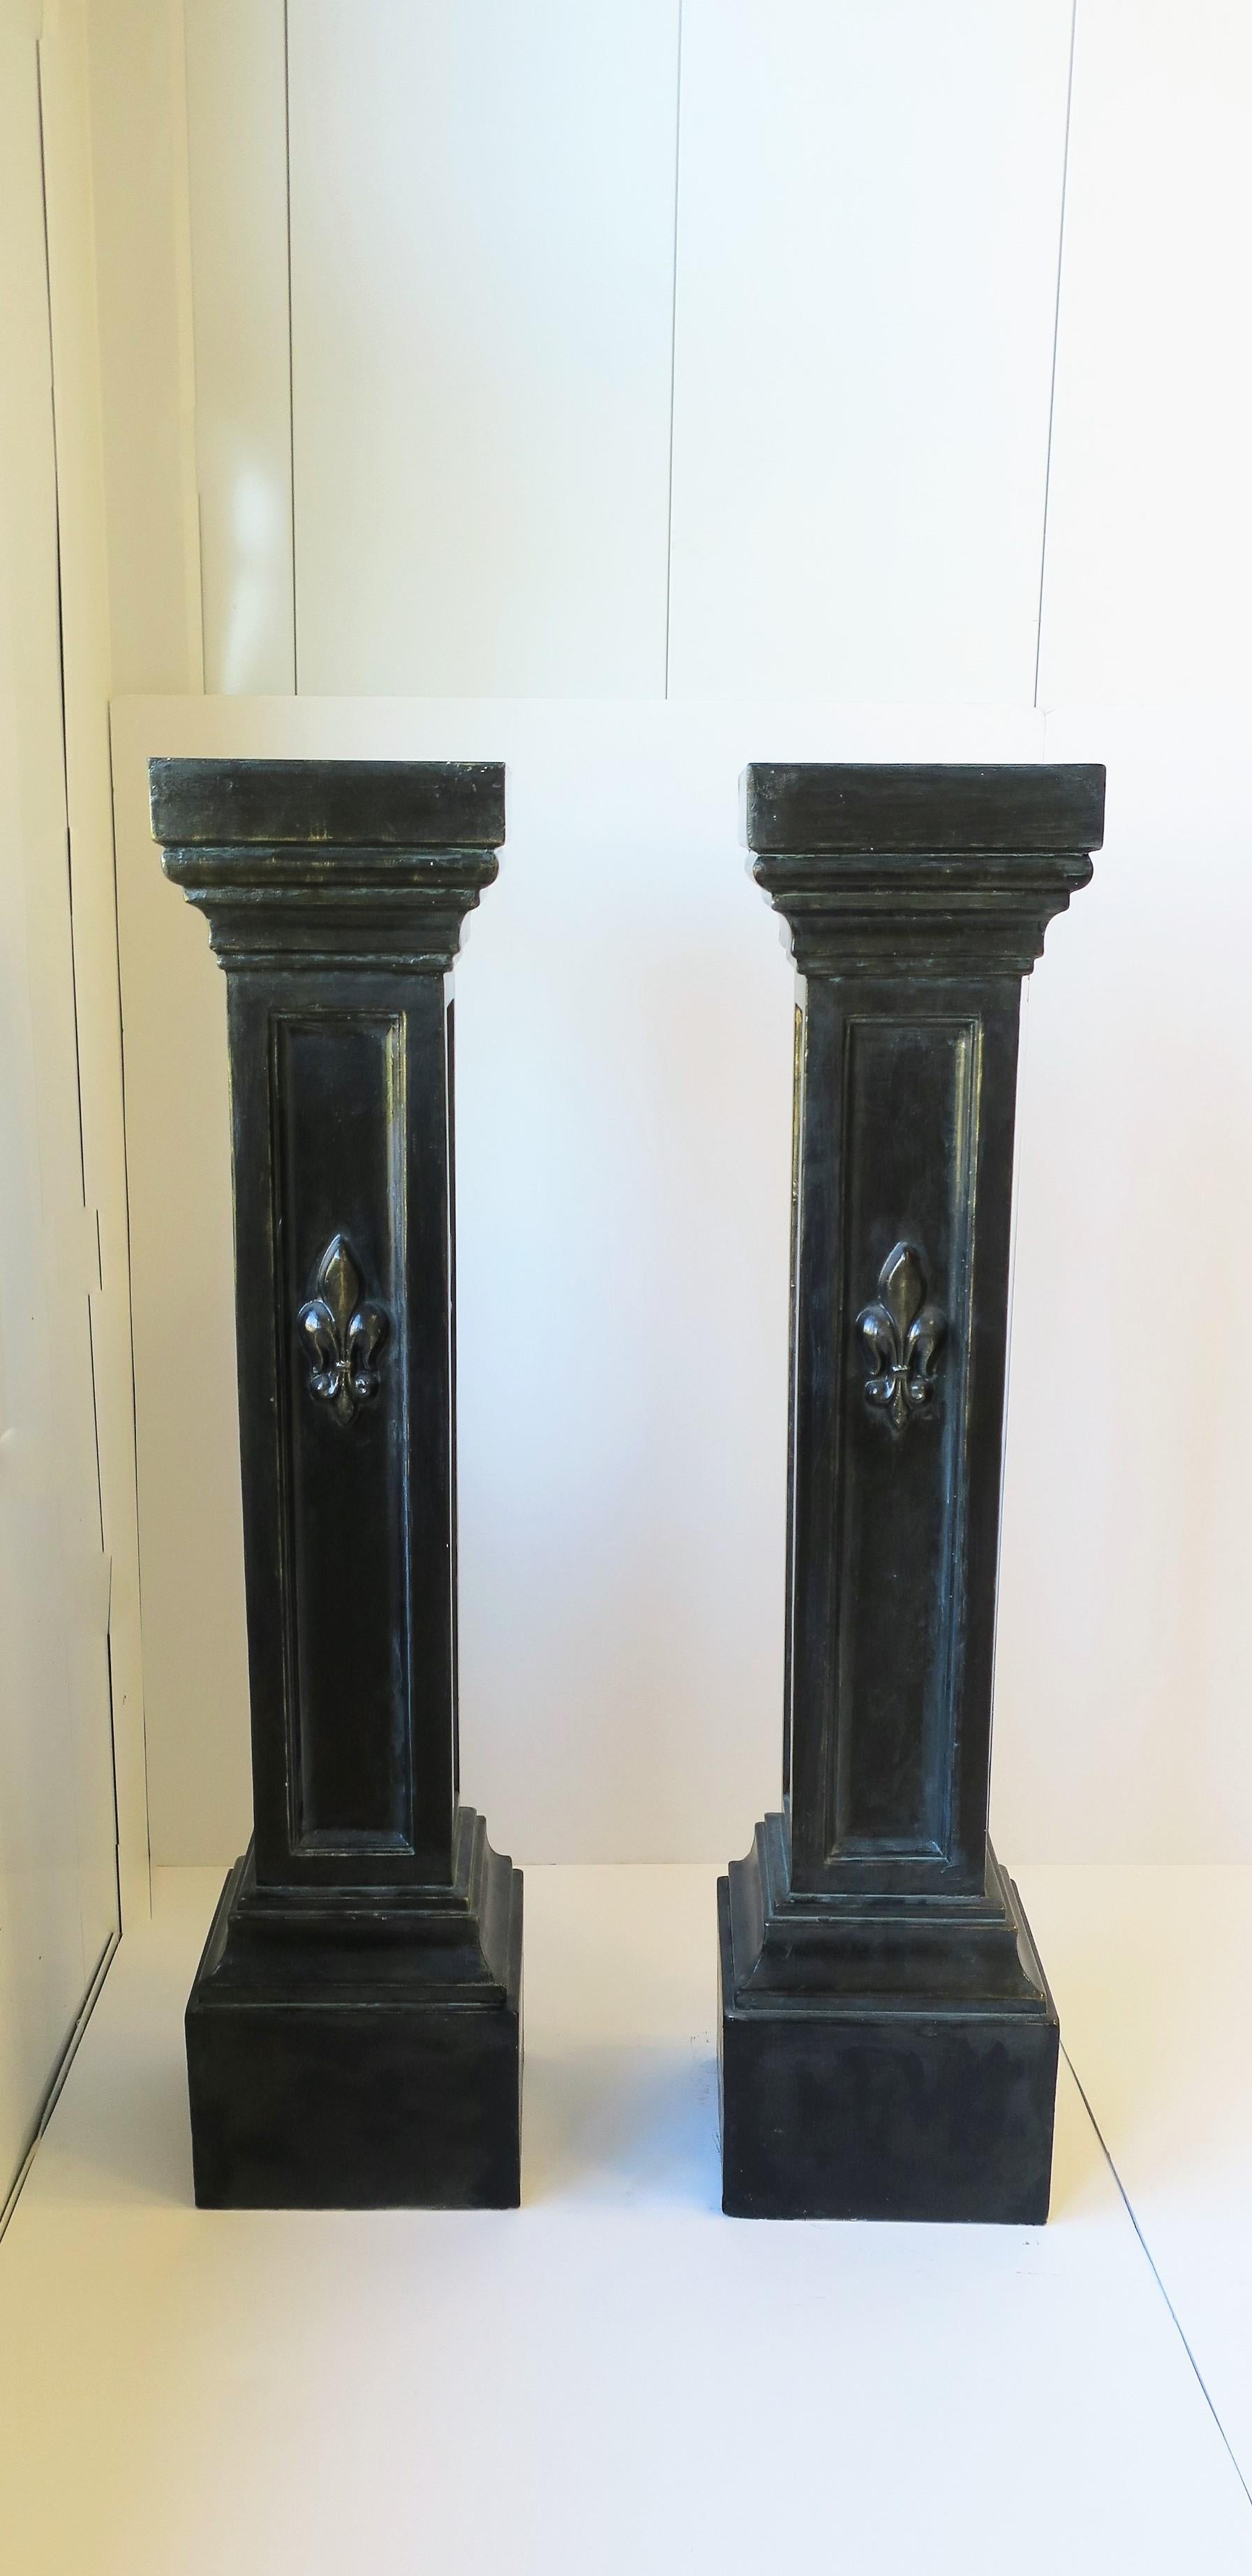 A beautiful pair of black painted plaster column pillar pedestal stands with French fleur-de-lis design, circa 20th century. Beautiful as standalone pieces or with sculpture, plant, art, design, etc. 

Dimensions: 
37.63